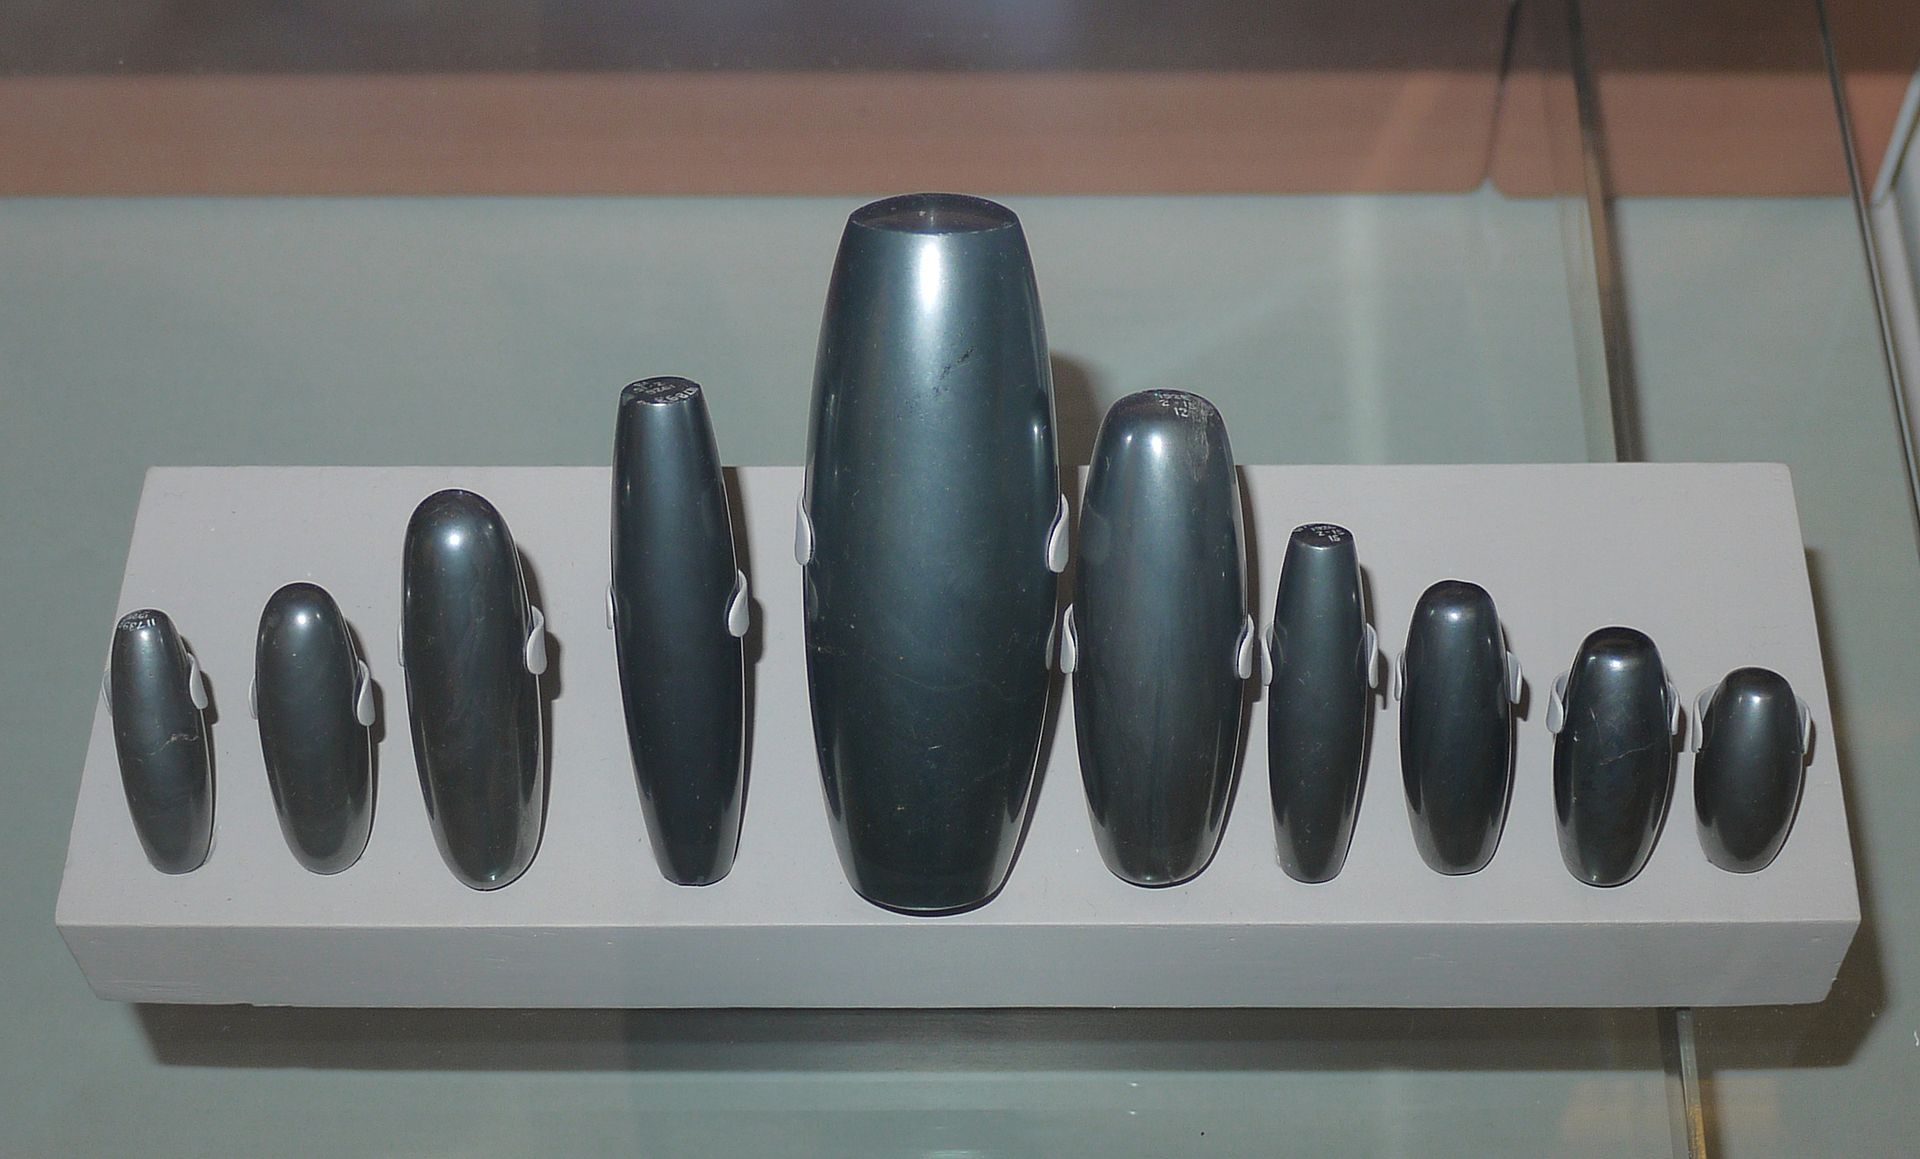 Mesopotamian weights made from haematite